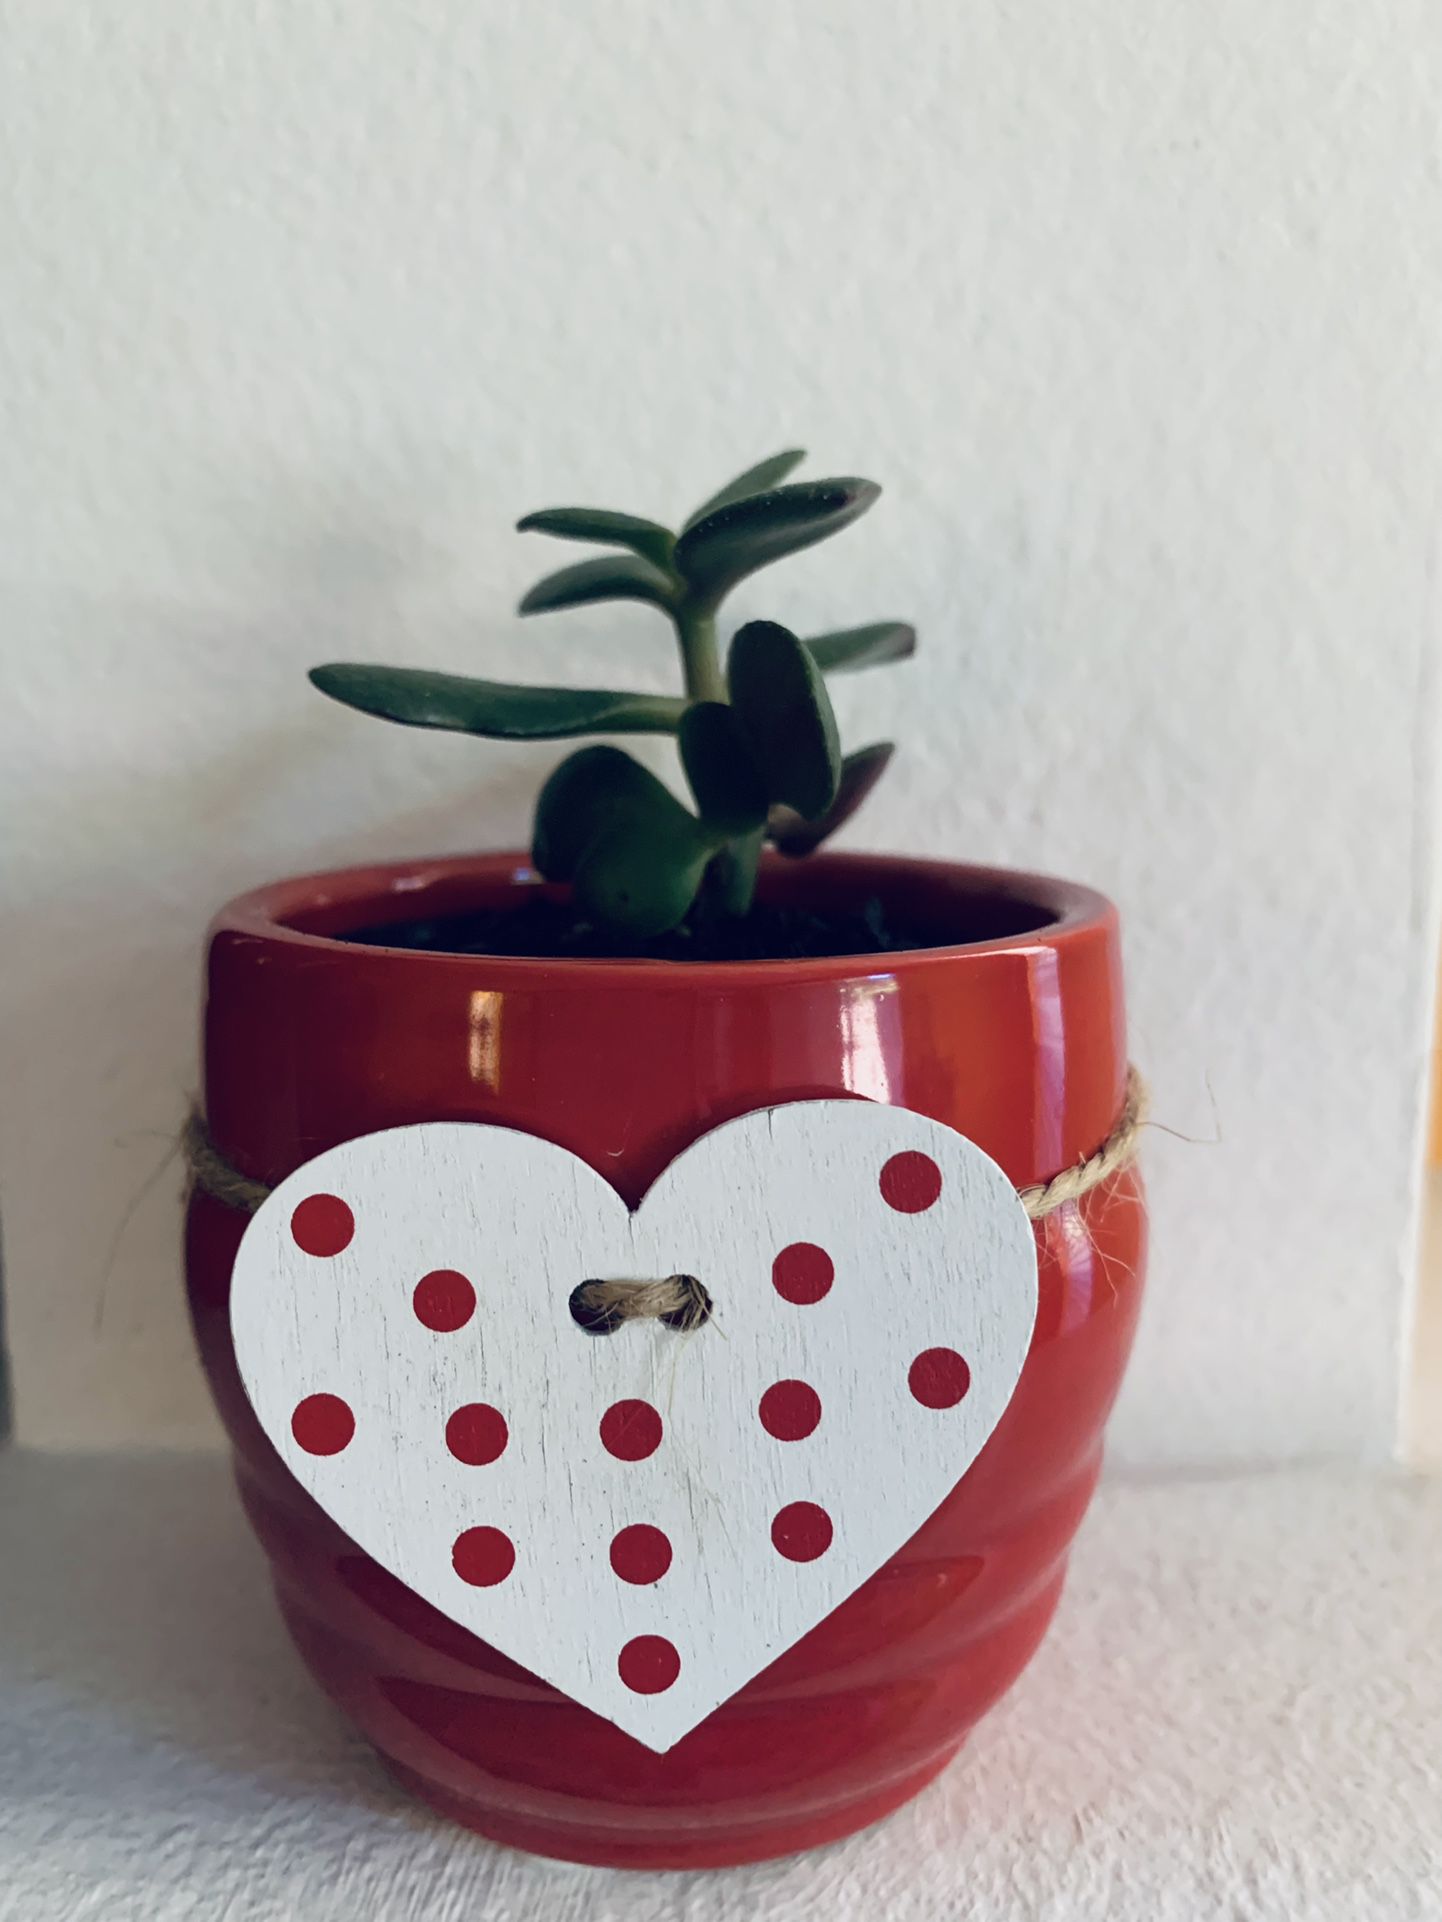 Live indoor Jade (Lucky Plant) in a Ceramic Pot